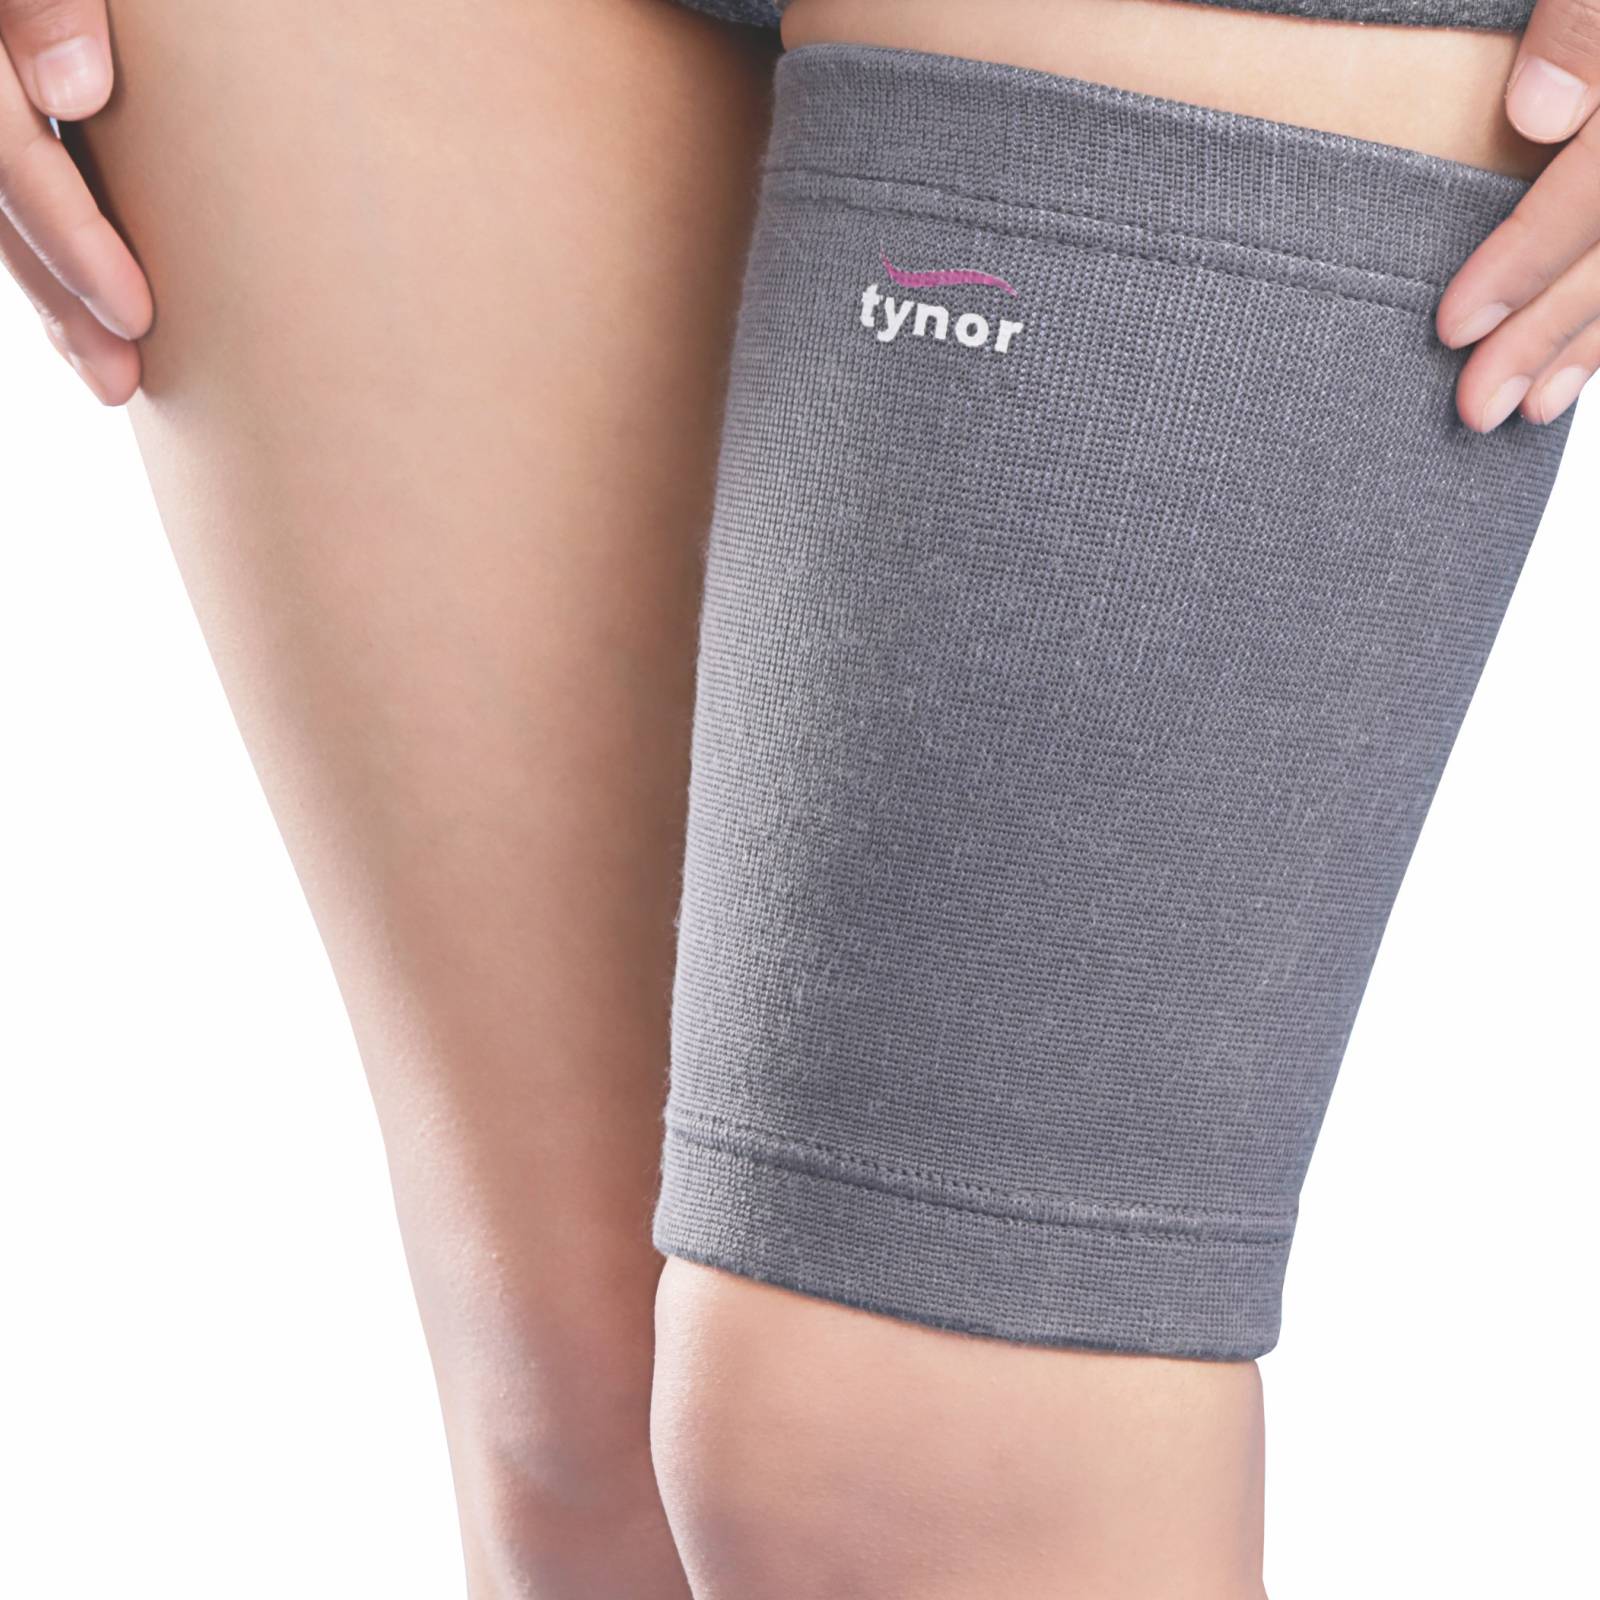 Thigh Medical Supplies: Enhancing Mobility and Comfort at Komfort Health